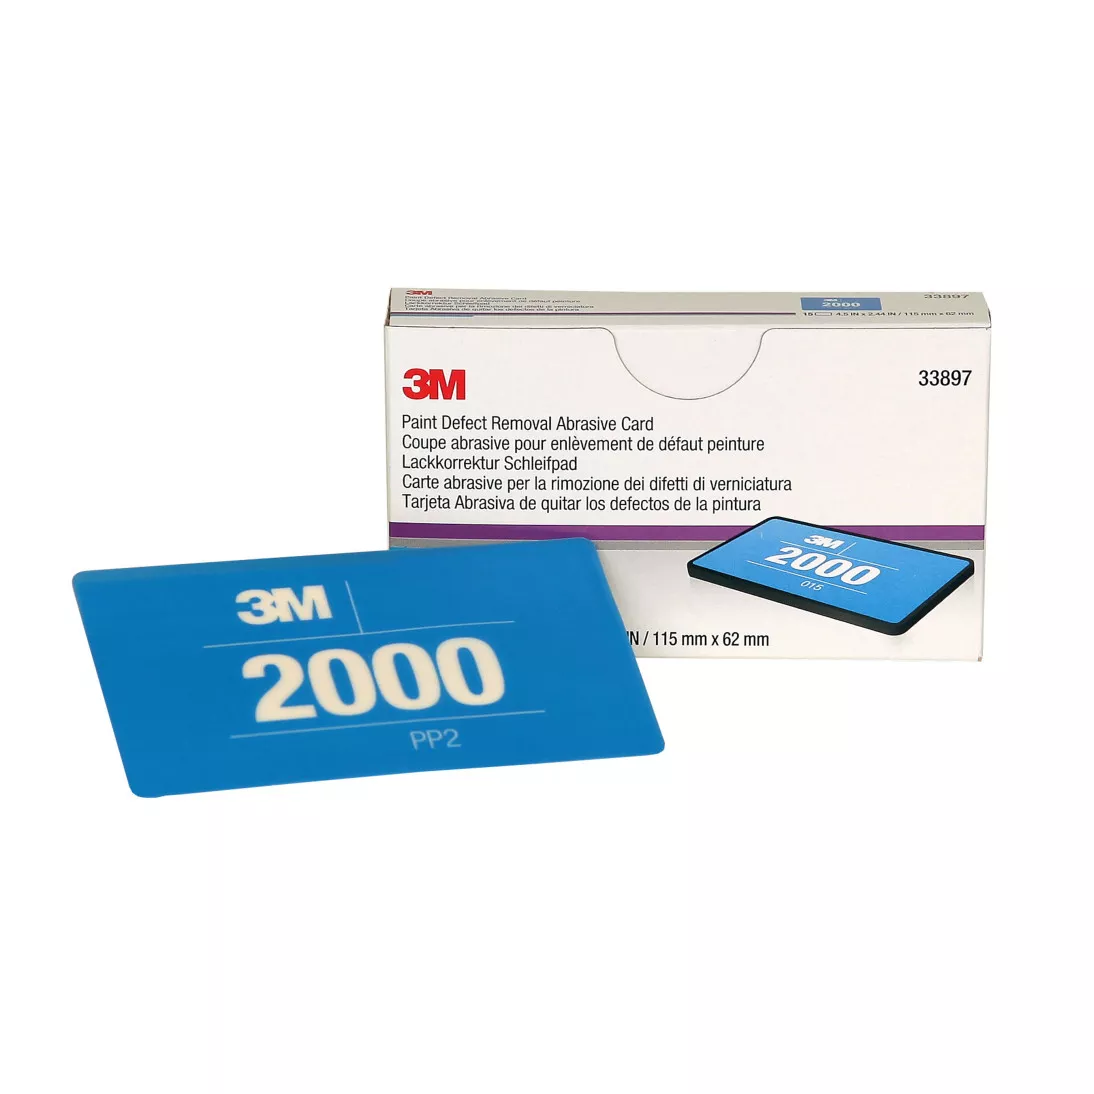 3M™ Paint Defect Removal Abrasive Card, 33897, 115 mm x 62 mm, 2000, 15
cards per pack, 10 packs per case